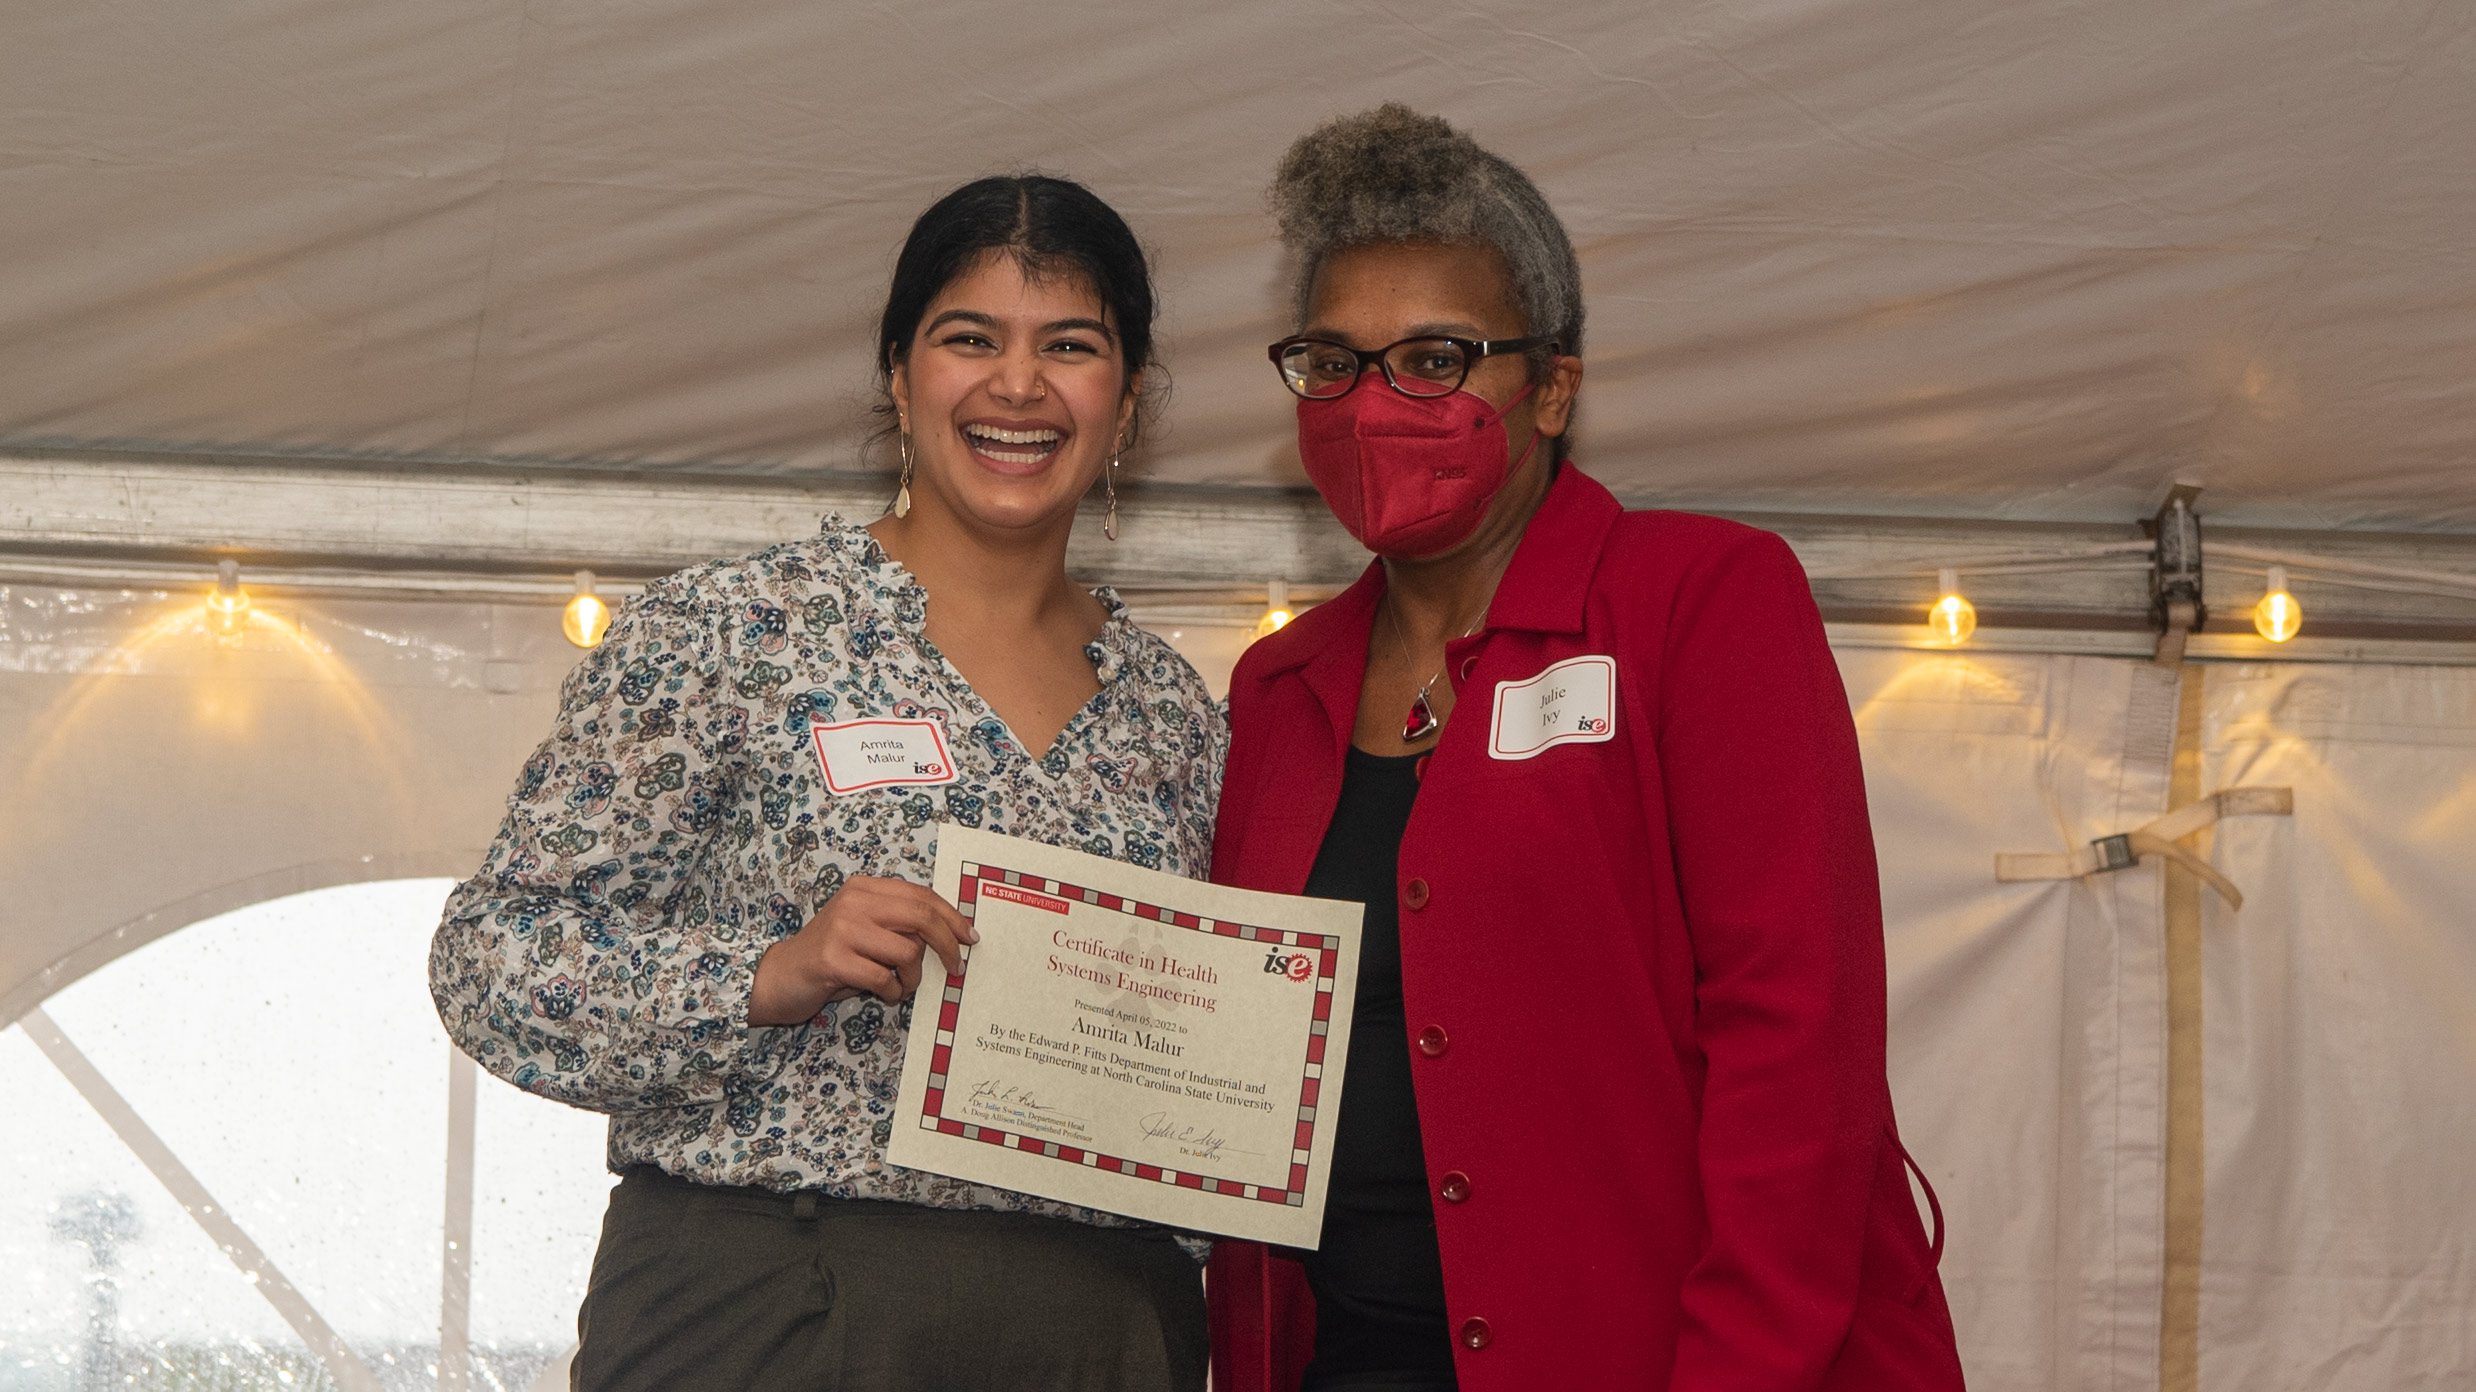 Amrita Malur receiving her Healthcare Systems Engineering Certificate at the 2022 C.A. Anderson Awards